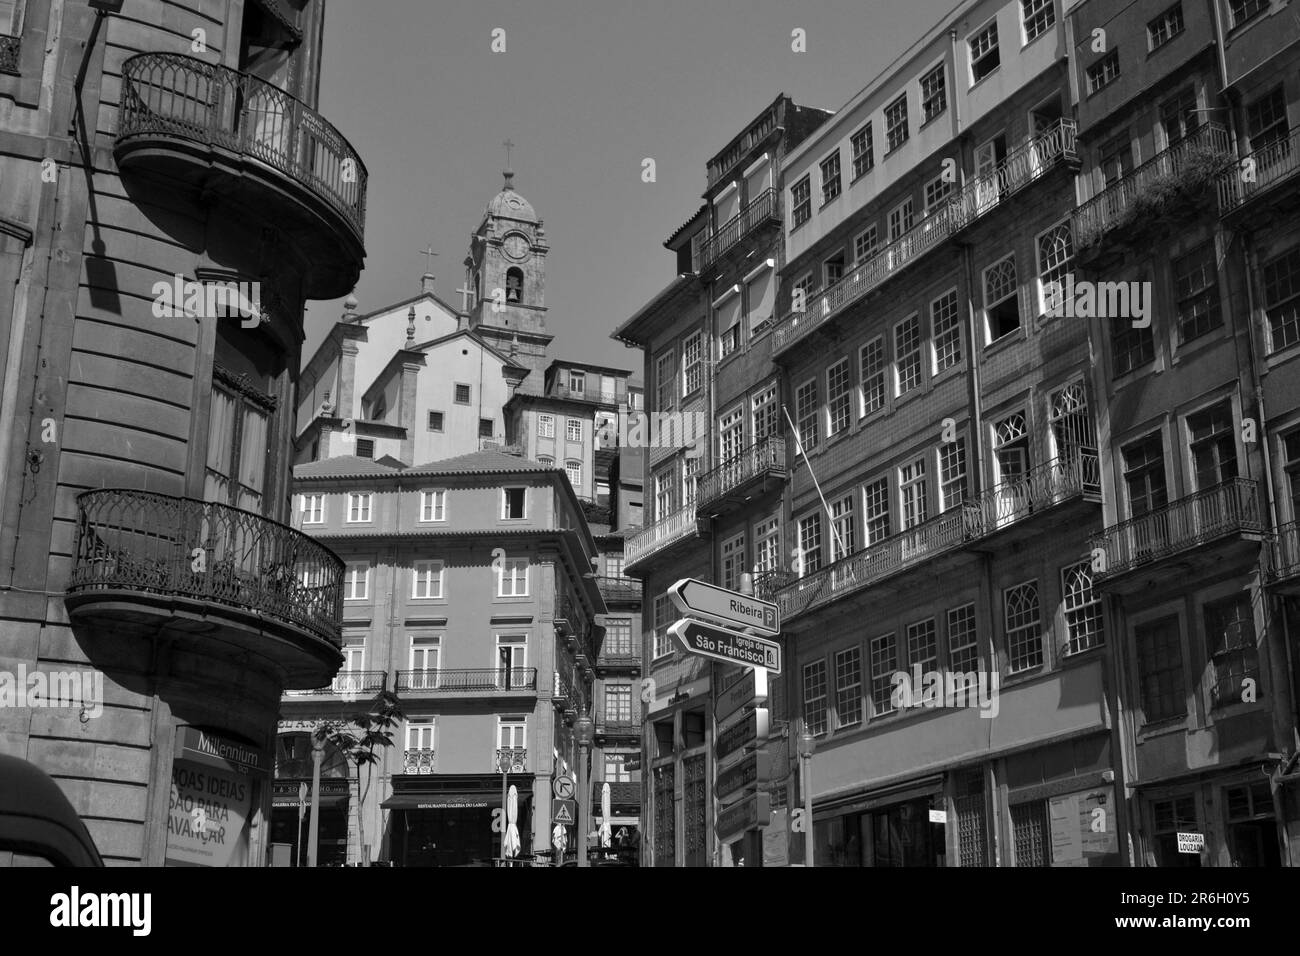 Several facades in Porto City, august 2015 17th. The downtown of Porto has the look of medieval architecture. Stock Photo